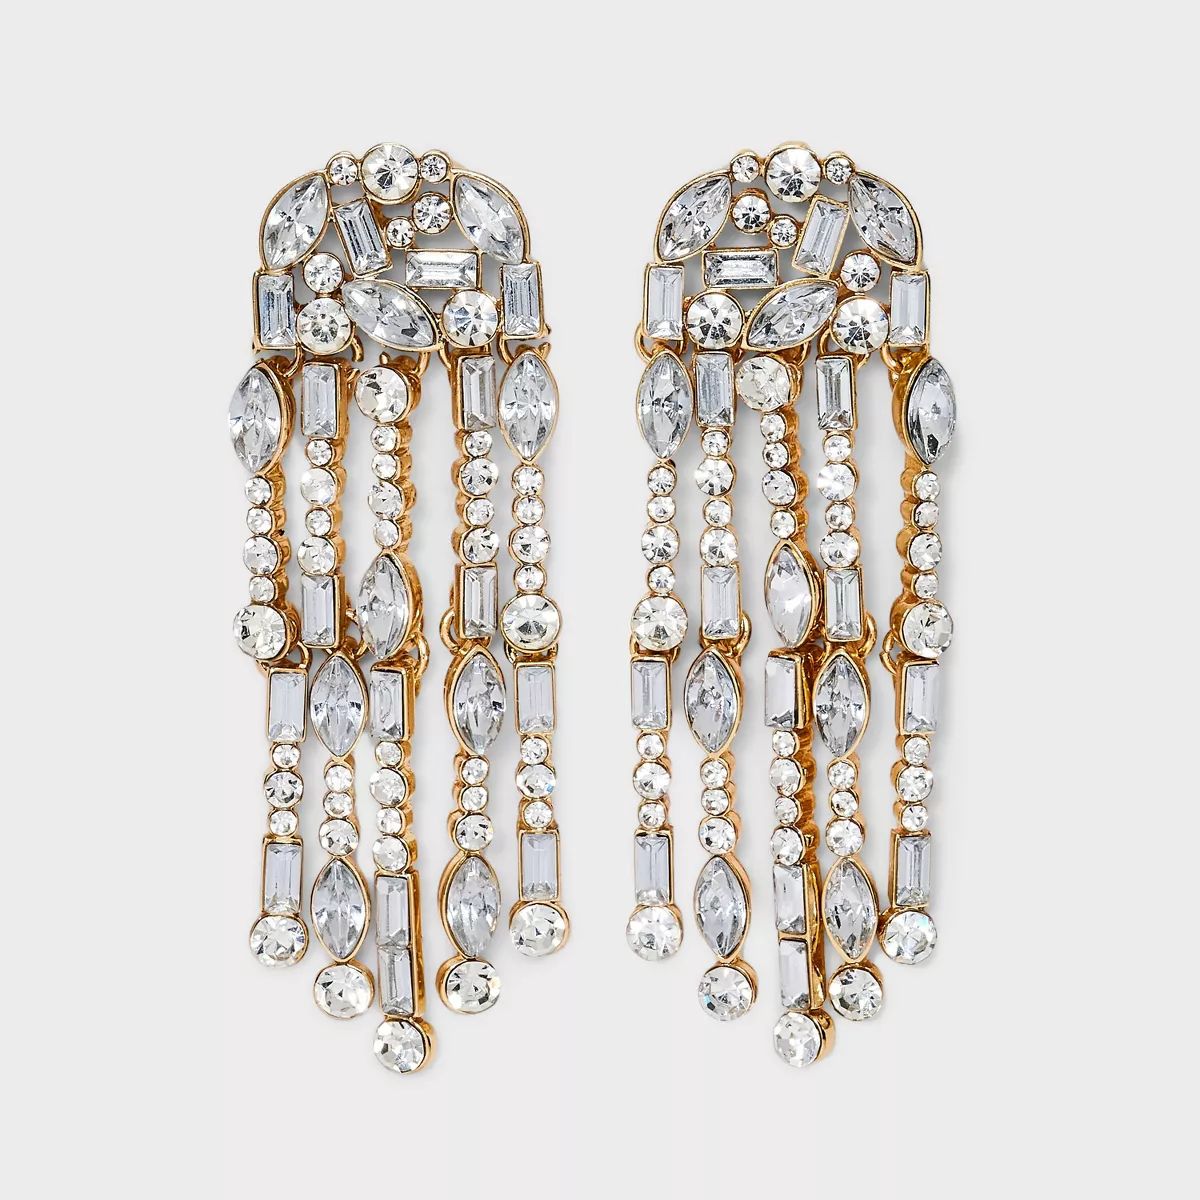 SUGARFIX by BaubleBar "Crystal Cluster Fringe" Statement Earrings - Gold | Target